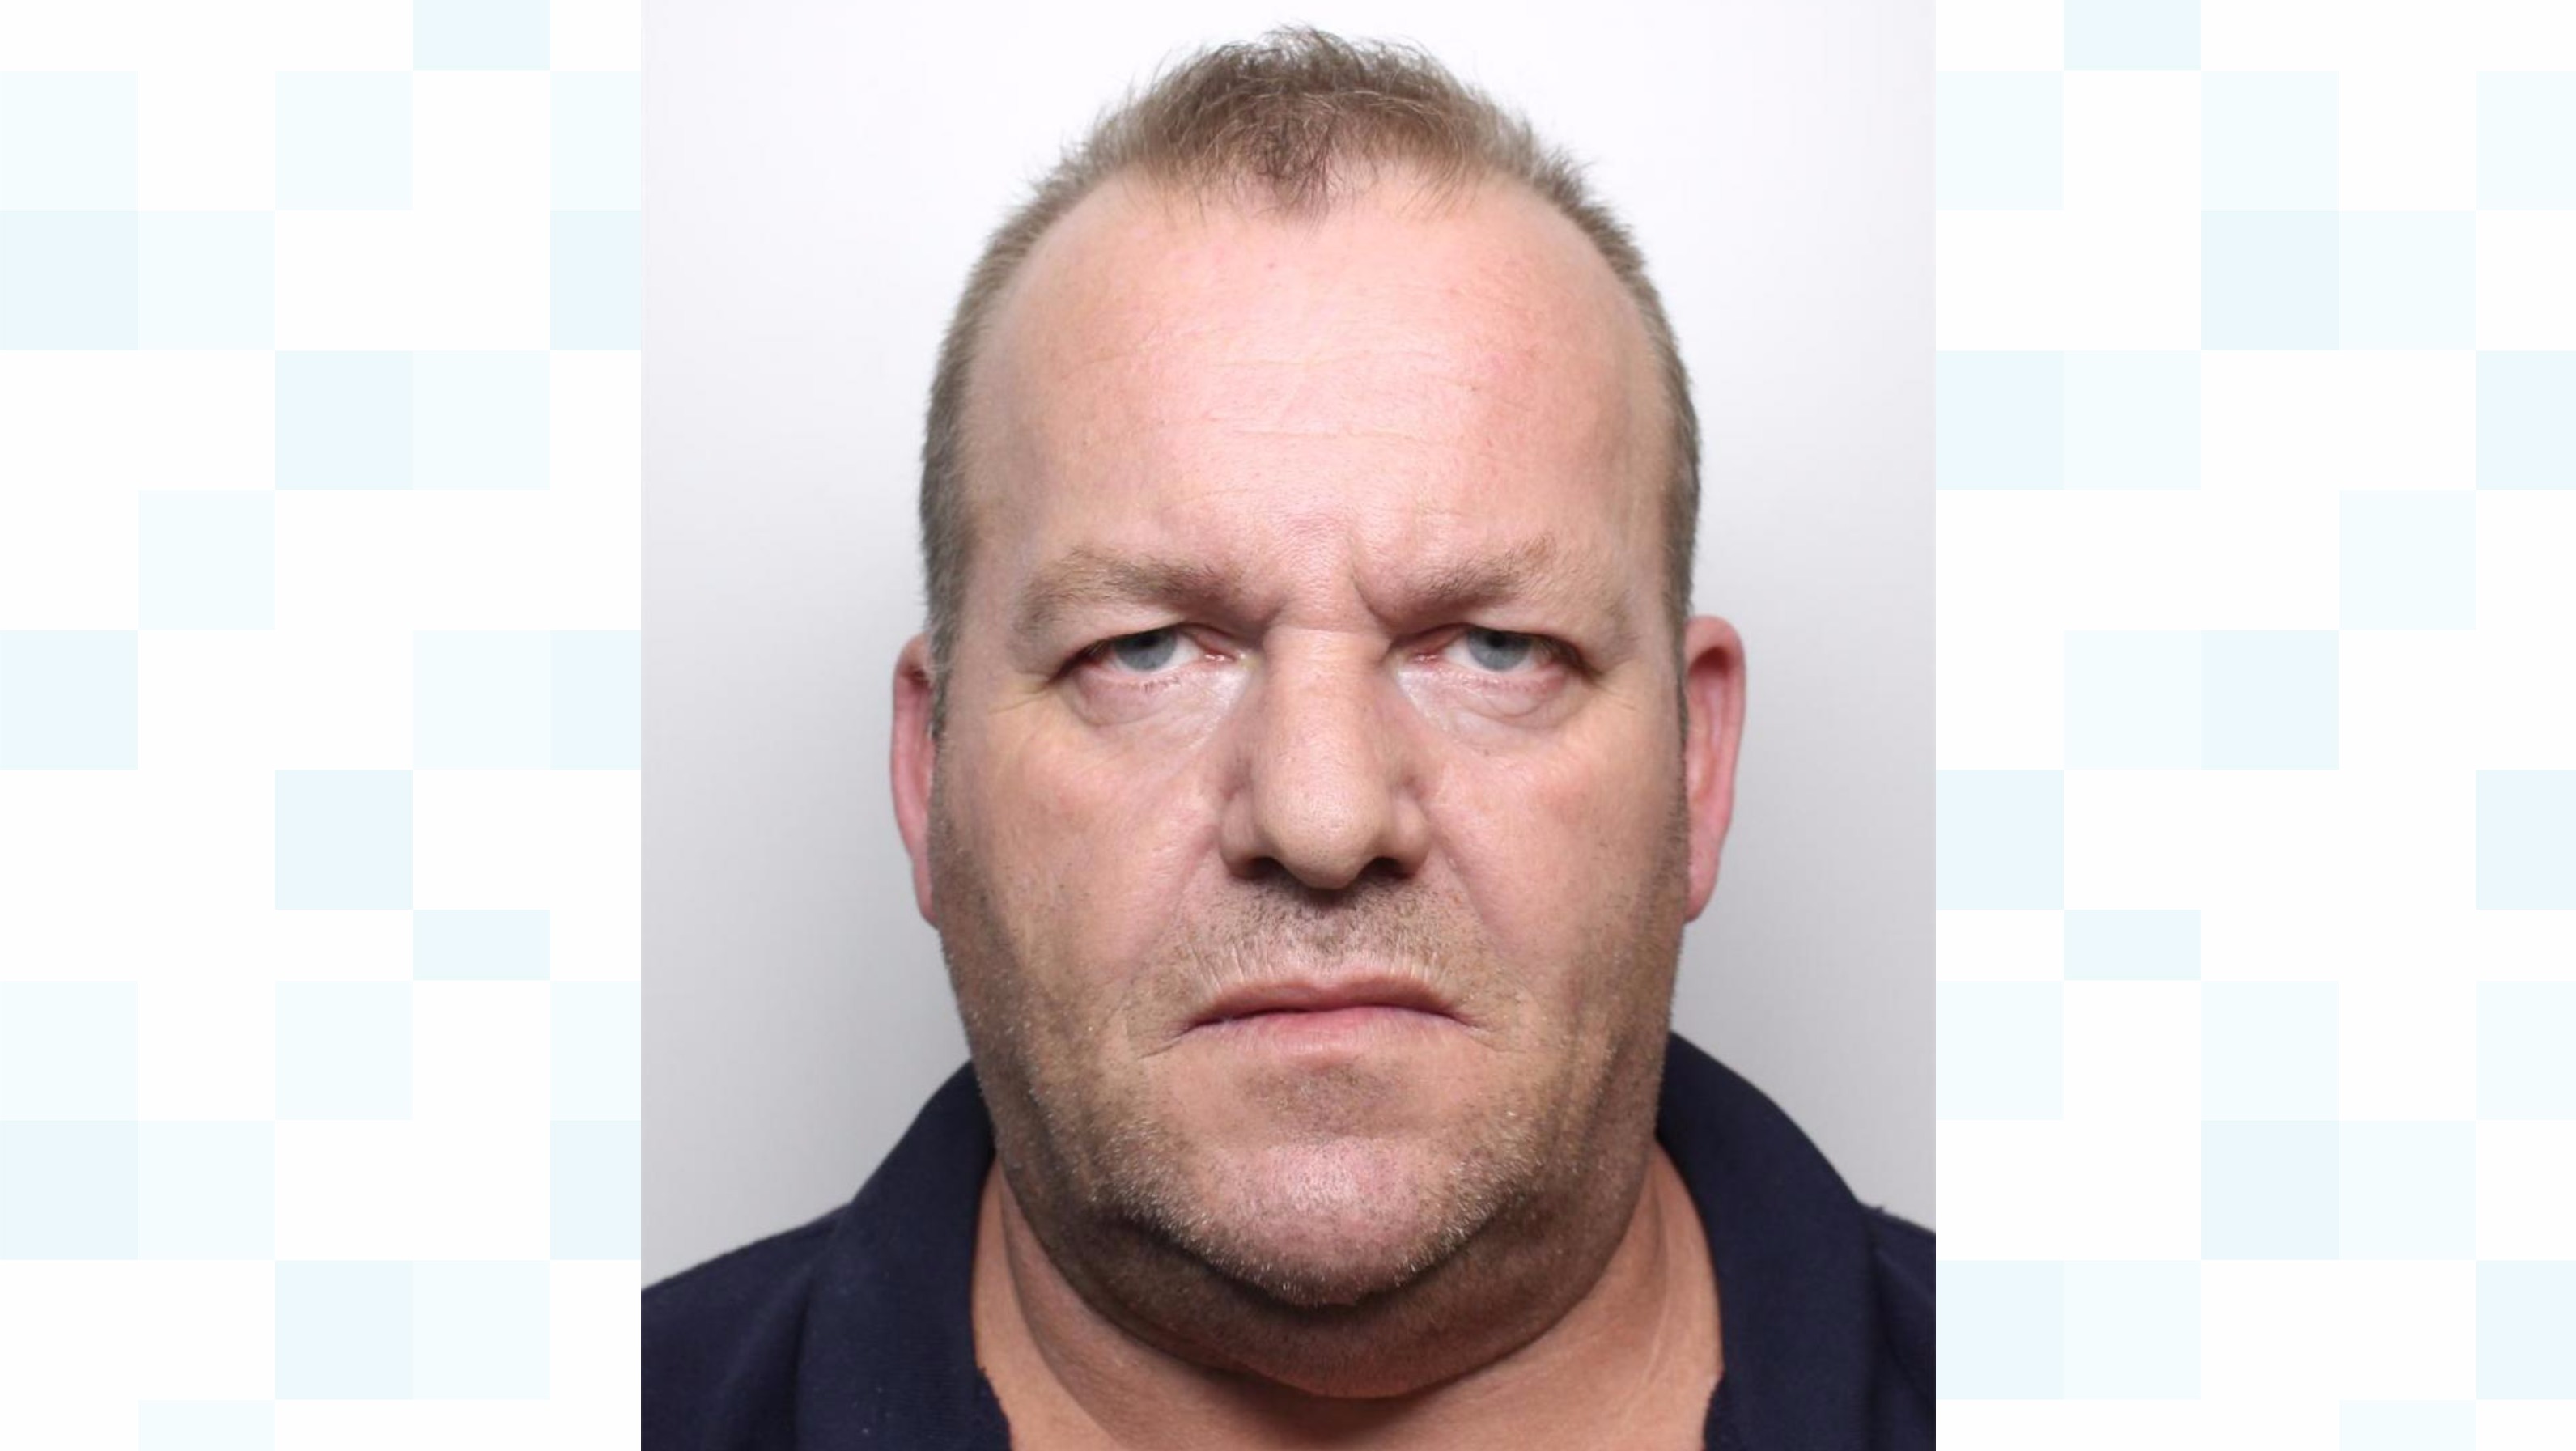 47yearold York Man Jailed For Grooming And Sexually Assaulting